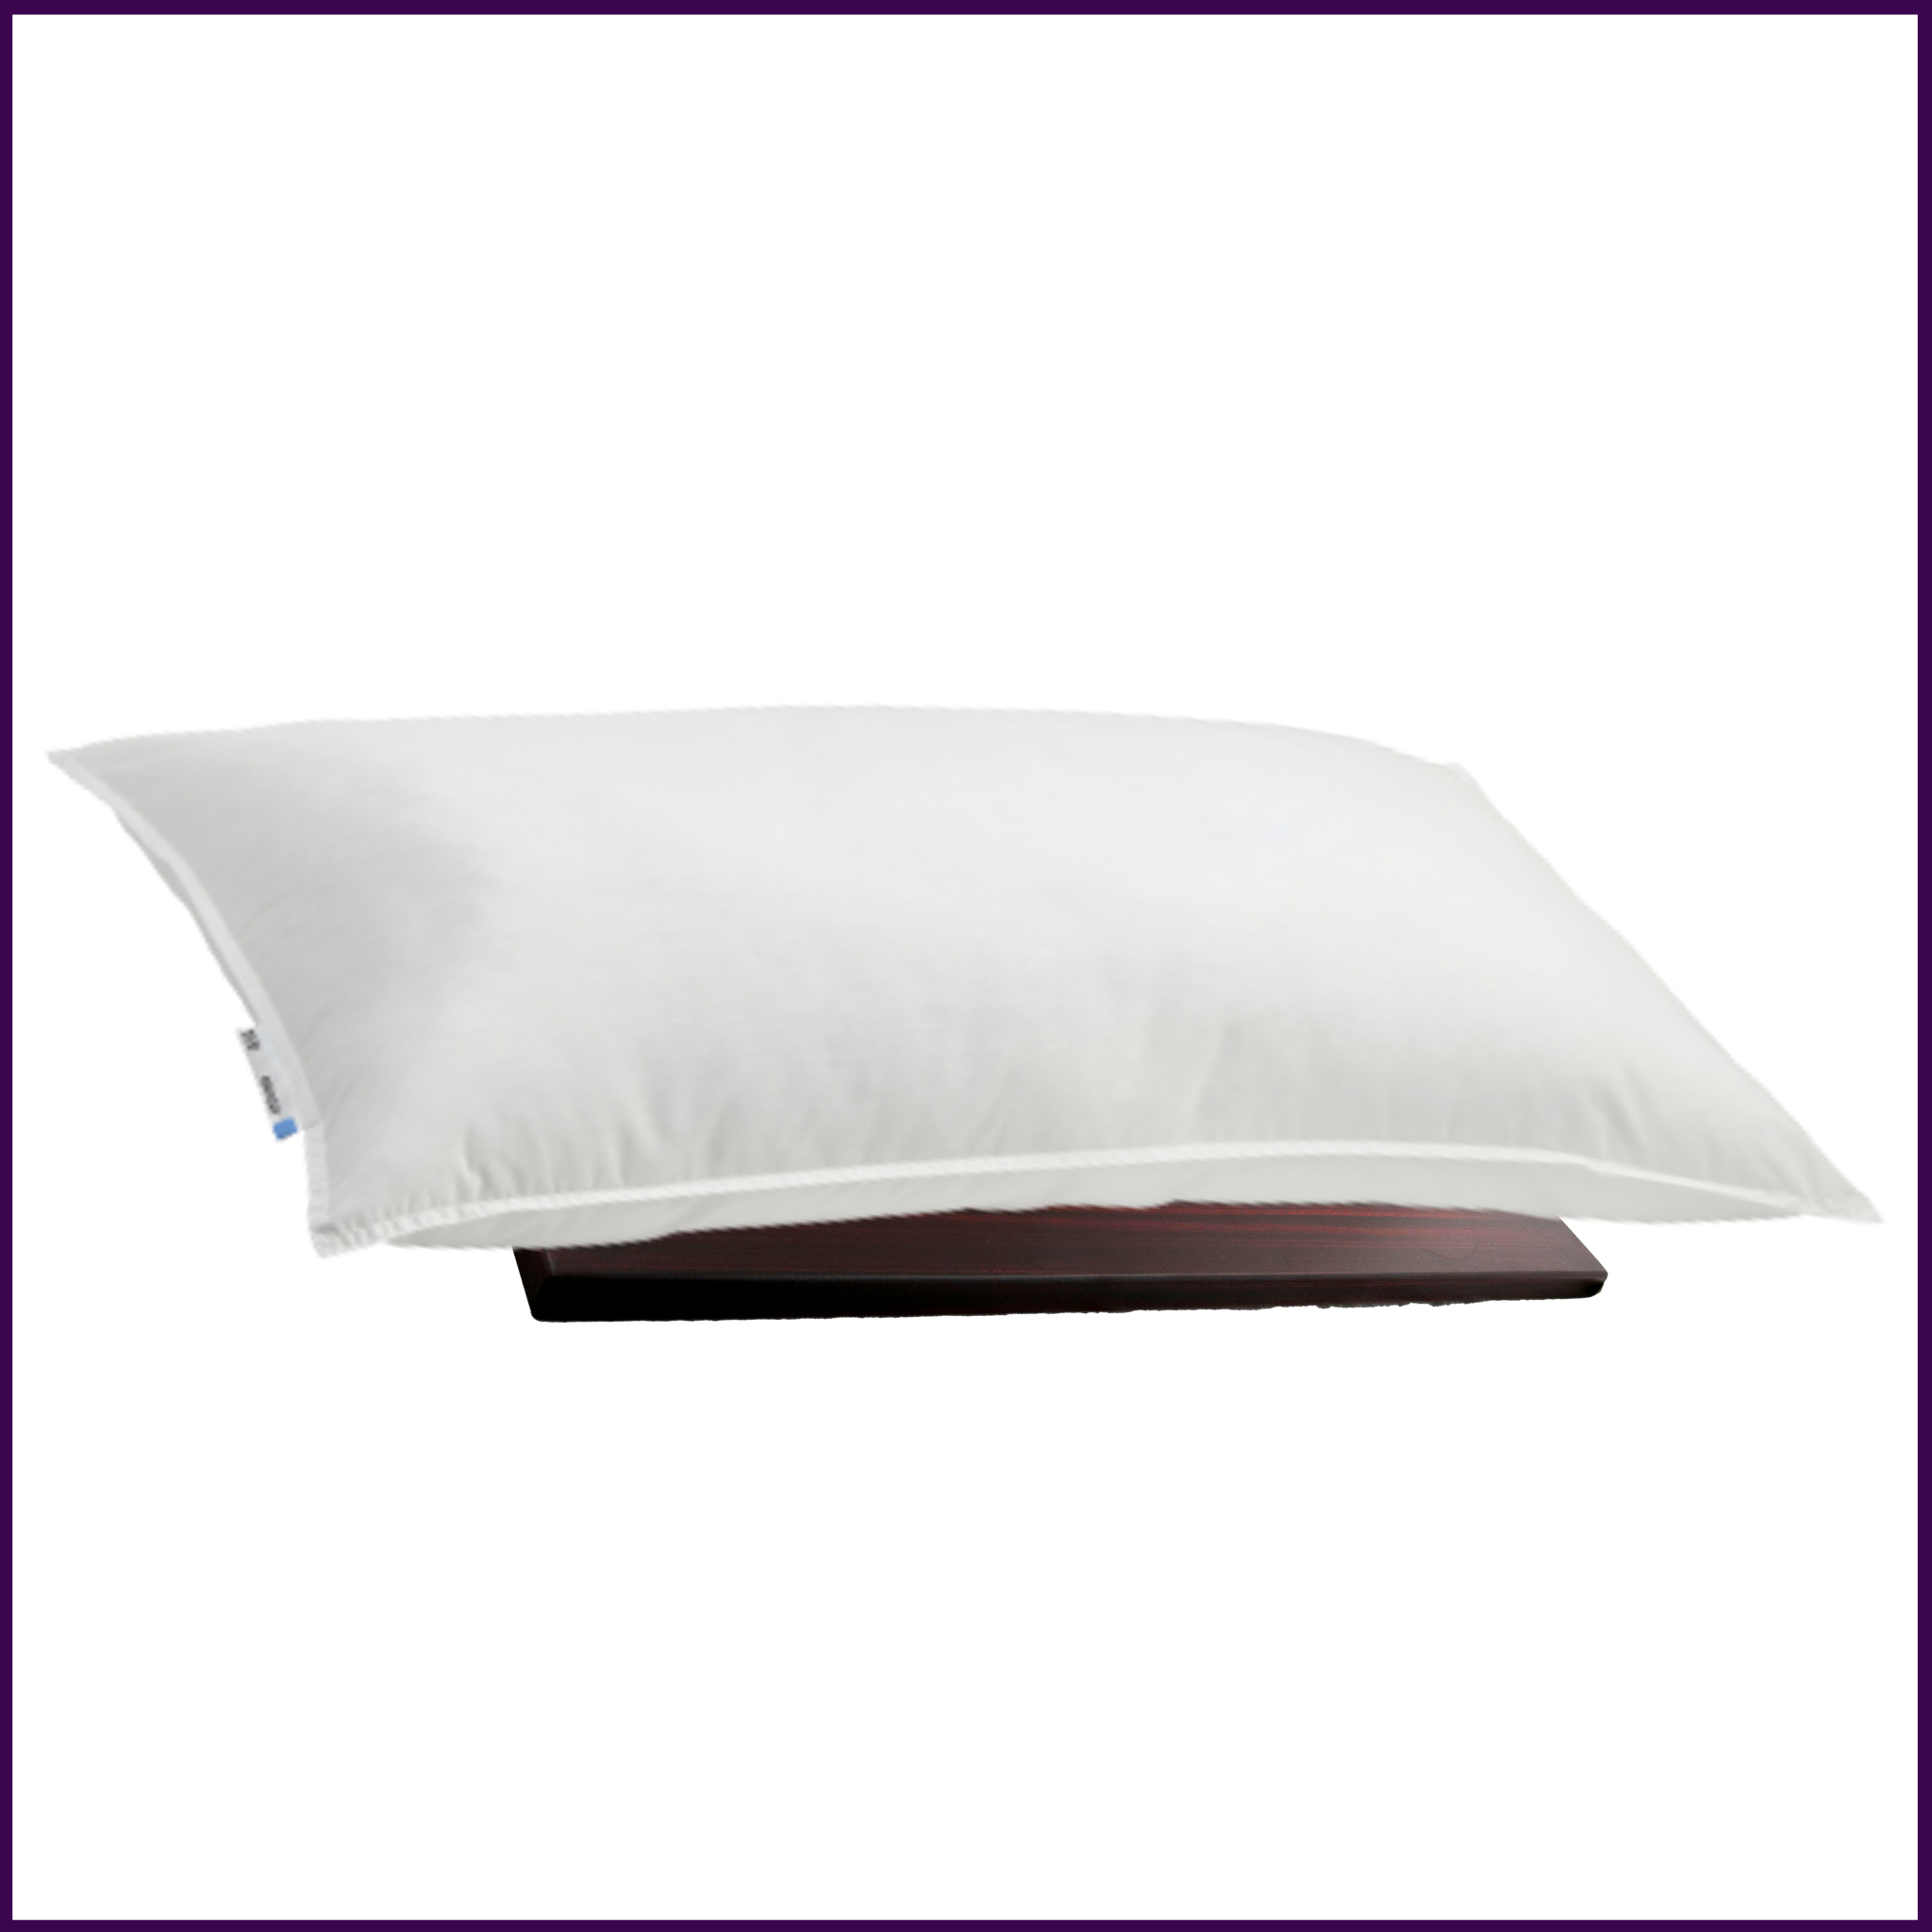 Single Piece - Sleep Well Pillow Pyramid for Relaxed Fearless Sleep and Nightmare/Haunting Free Dreams - 51pyramids